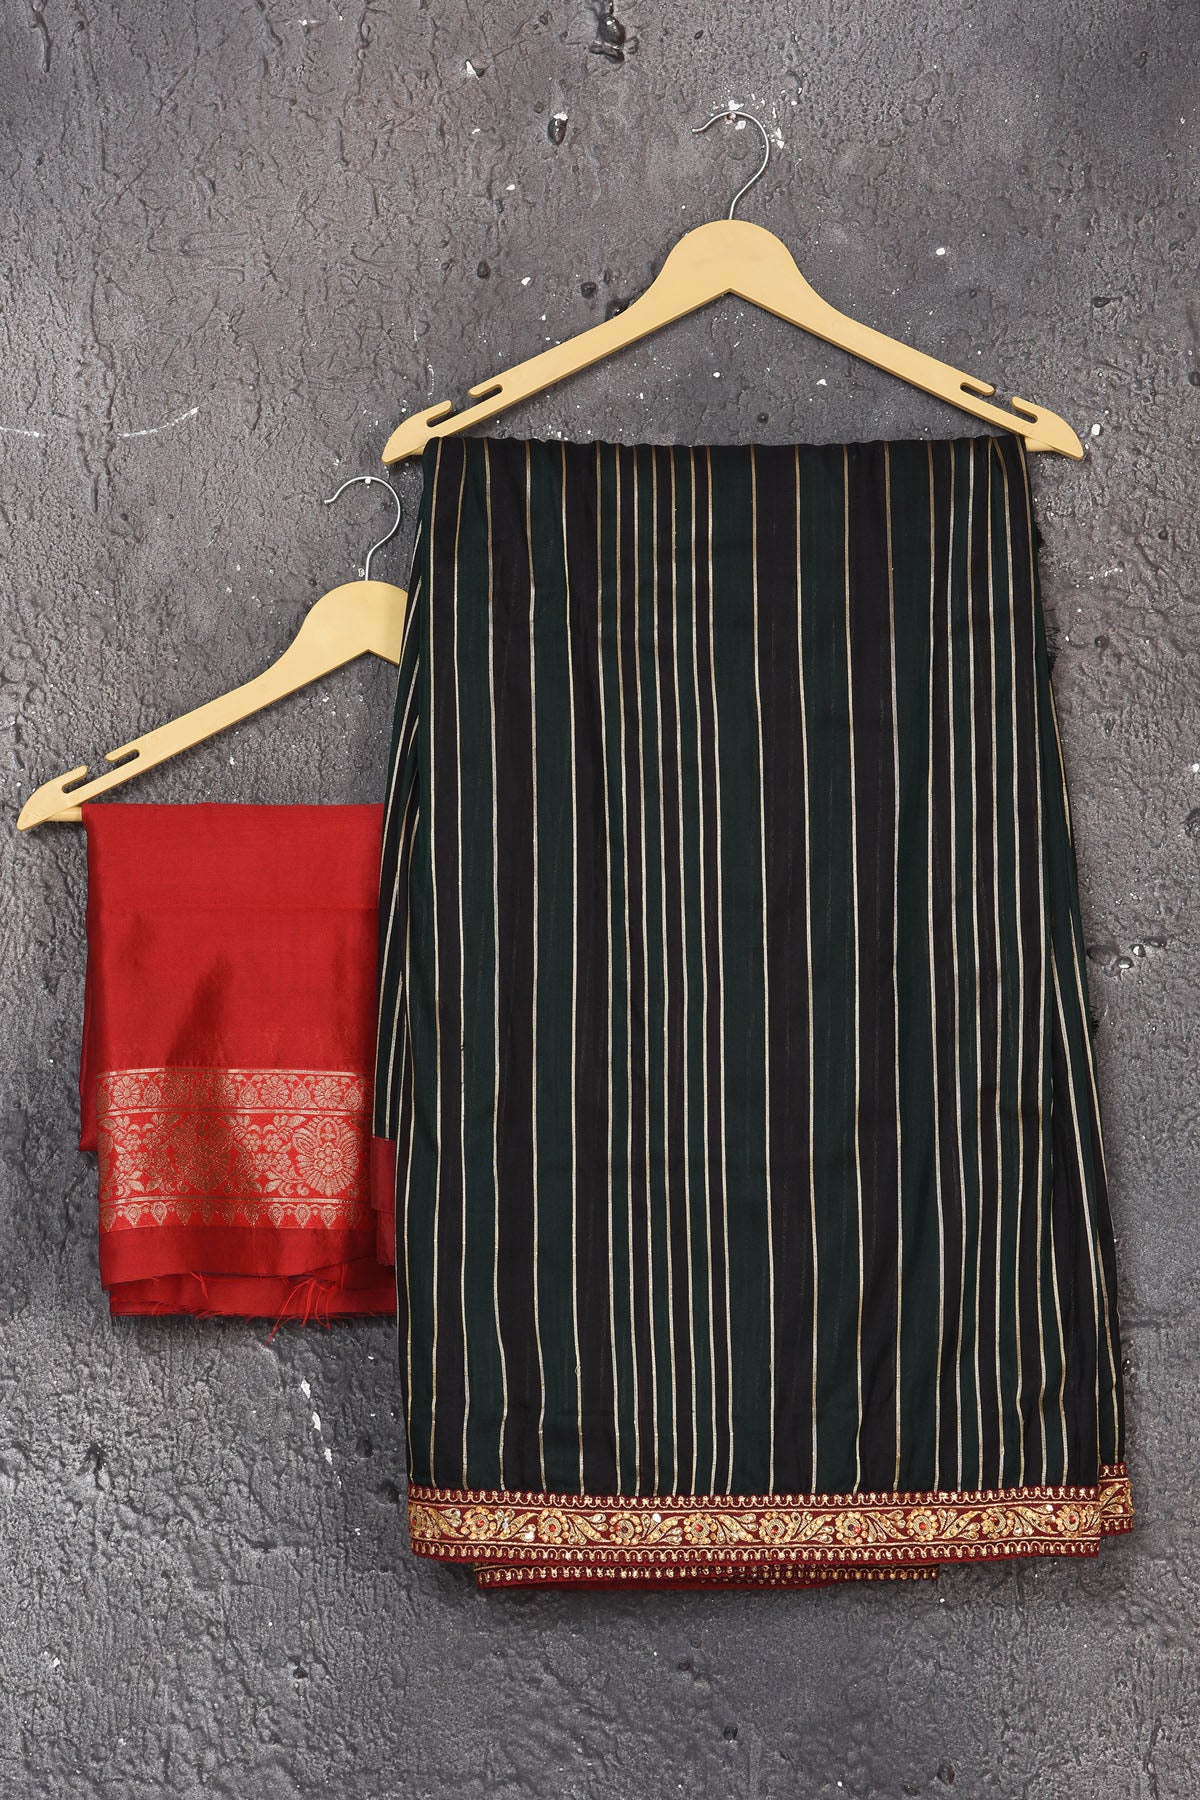 Buy this elegant black saree leheriya with gota patti work online in USA. Style this designer sari which has a beautiful red border with golden lace at the edge with a potli bag and high heels. Add designer gota patti sari to your collection from Pure Elegance Indian saree store in USA.- Unstitched red blouse.